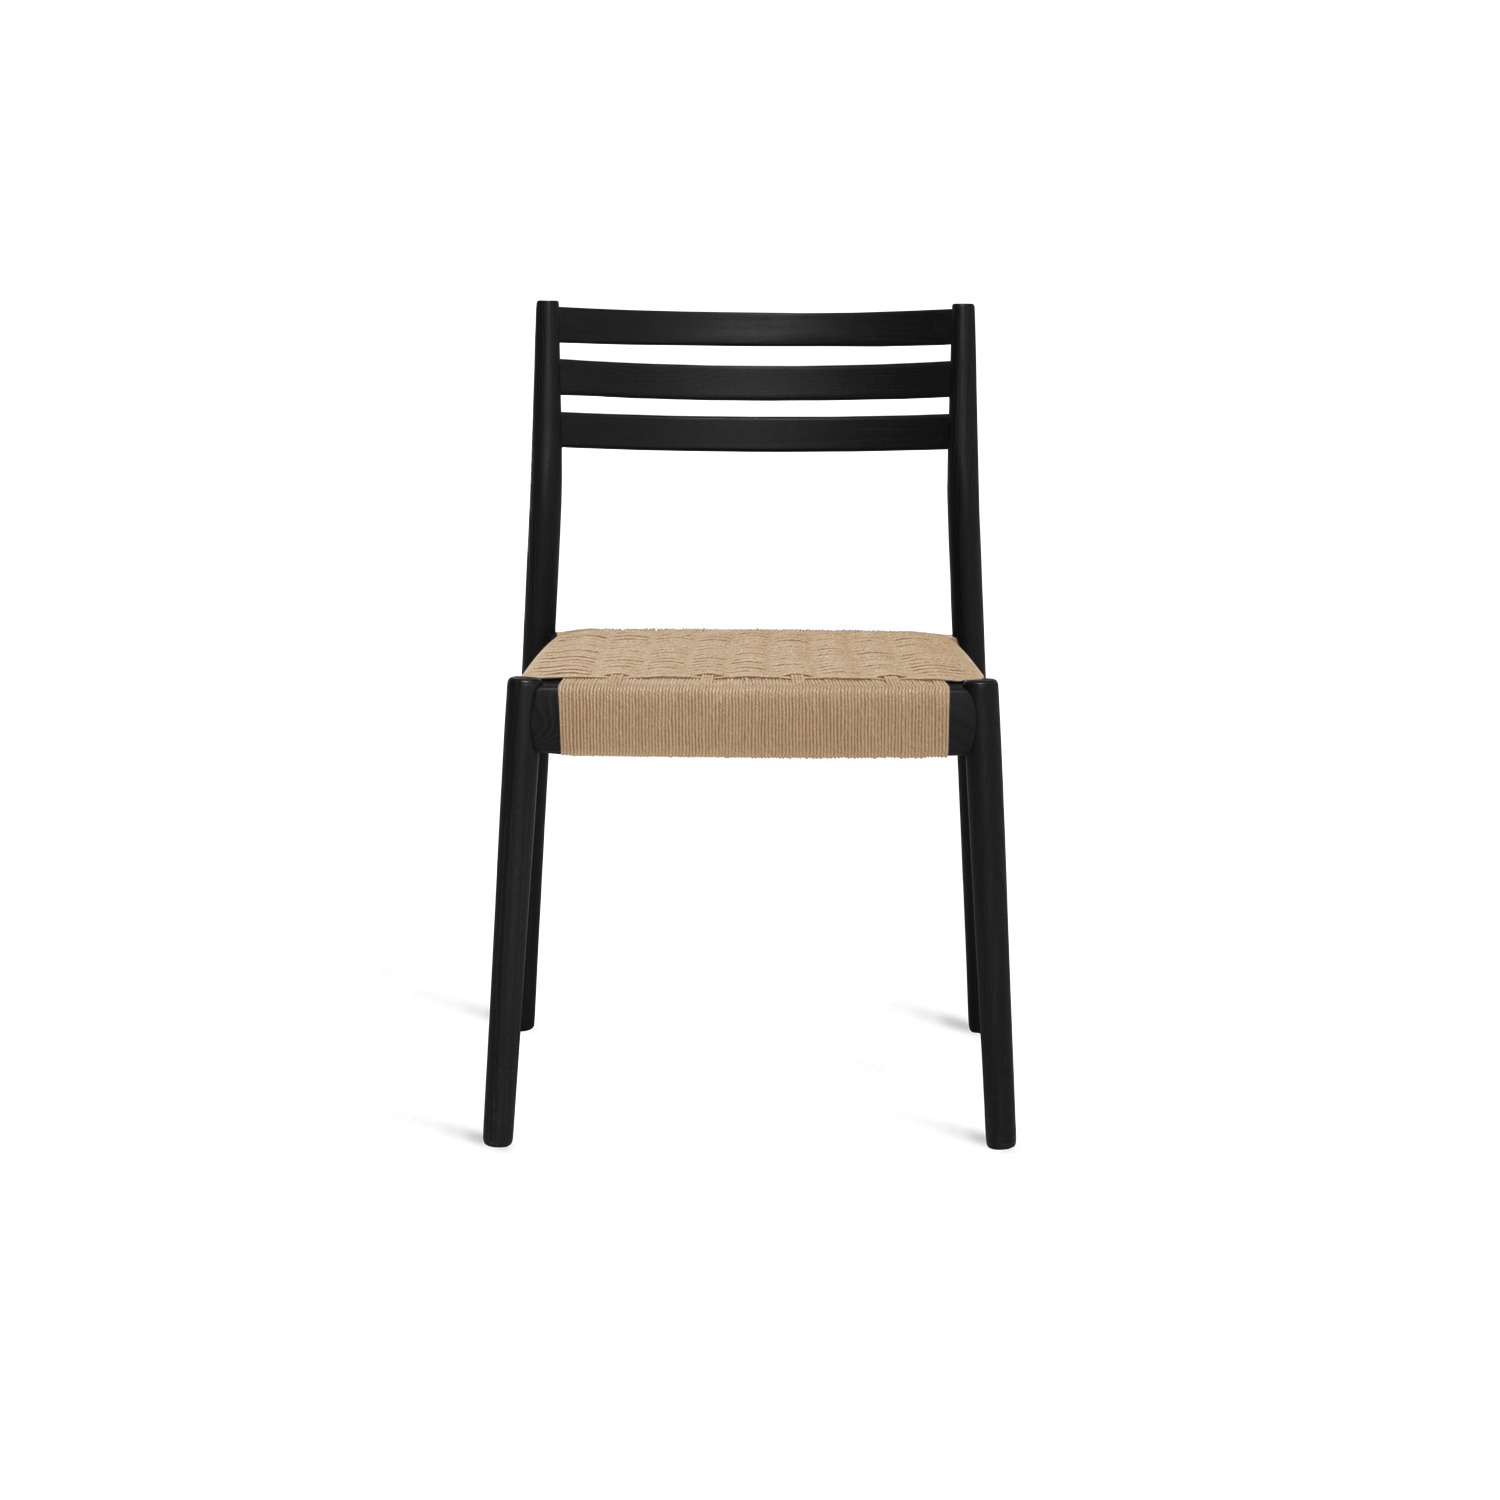 Bogart Stackable Wood Dining Chair, Woven Cord Seat, Black